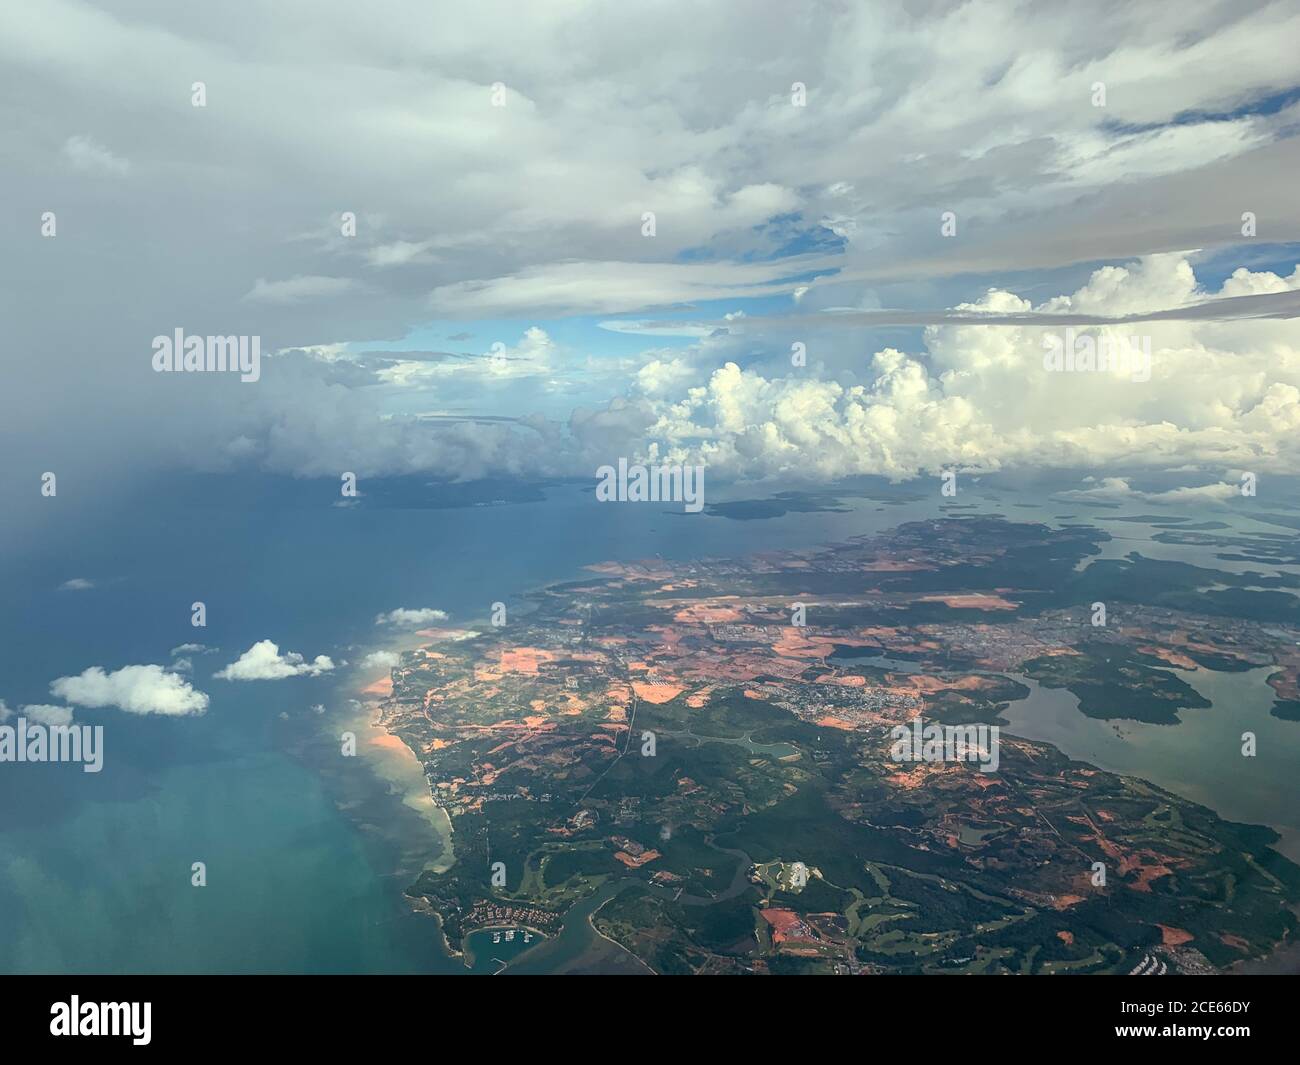 Wing of an airplane flying above the ocean. The view from an airplane window. Stock Photo